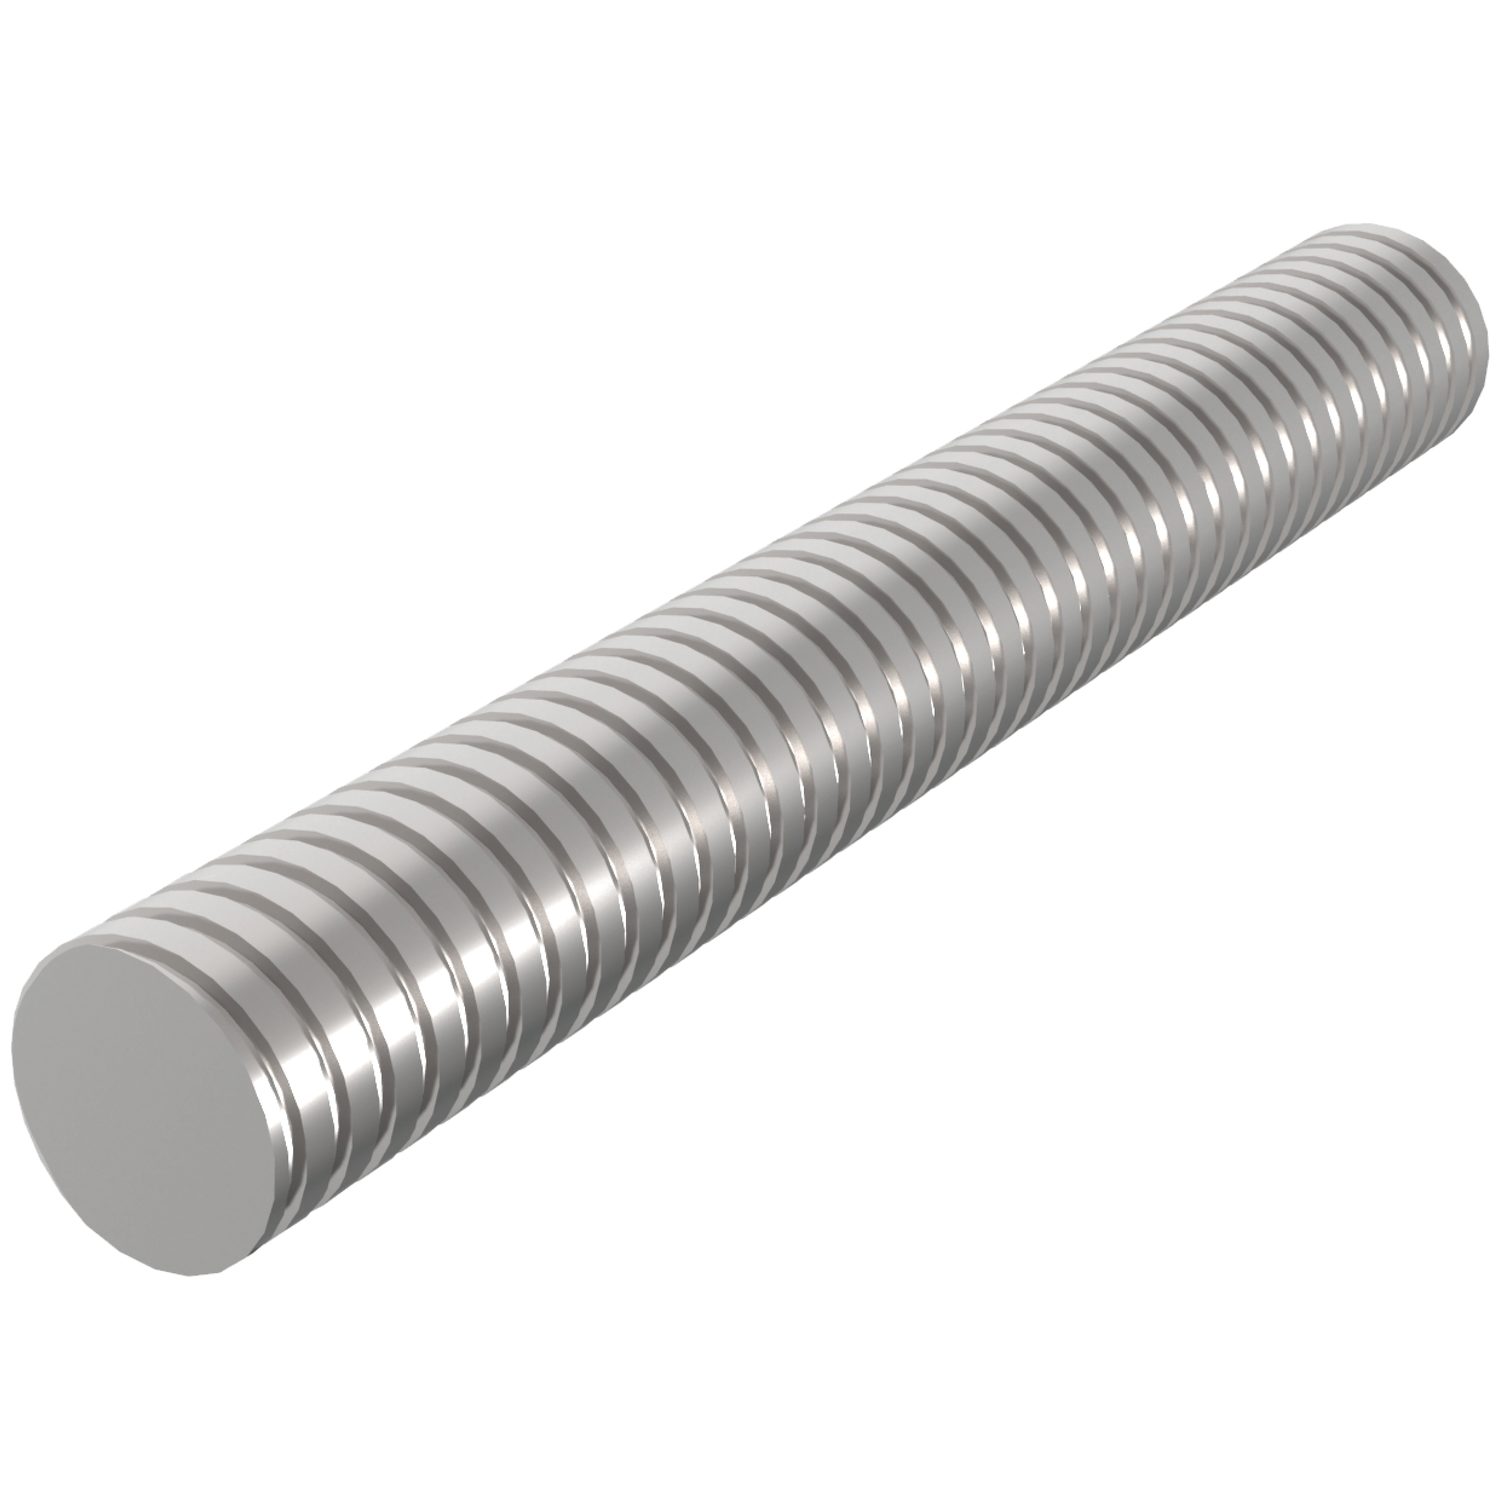 Stainless Lead Screws Stainless steel trapezoidal lead screws (316 s/s). TR threads 10 to 70mm. Standard left hand threads.